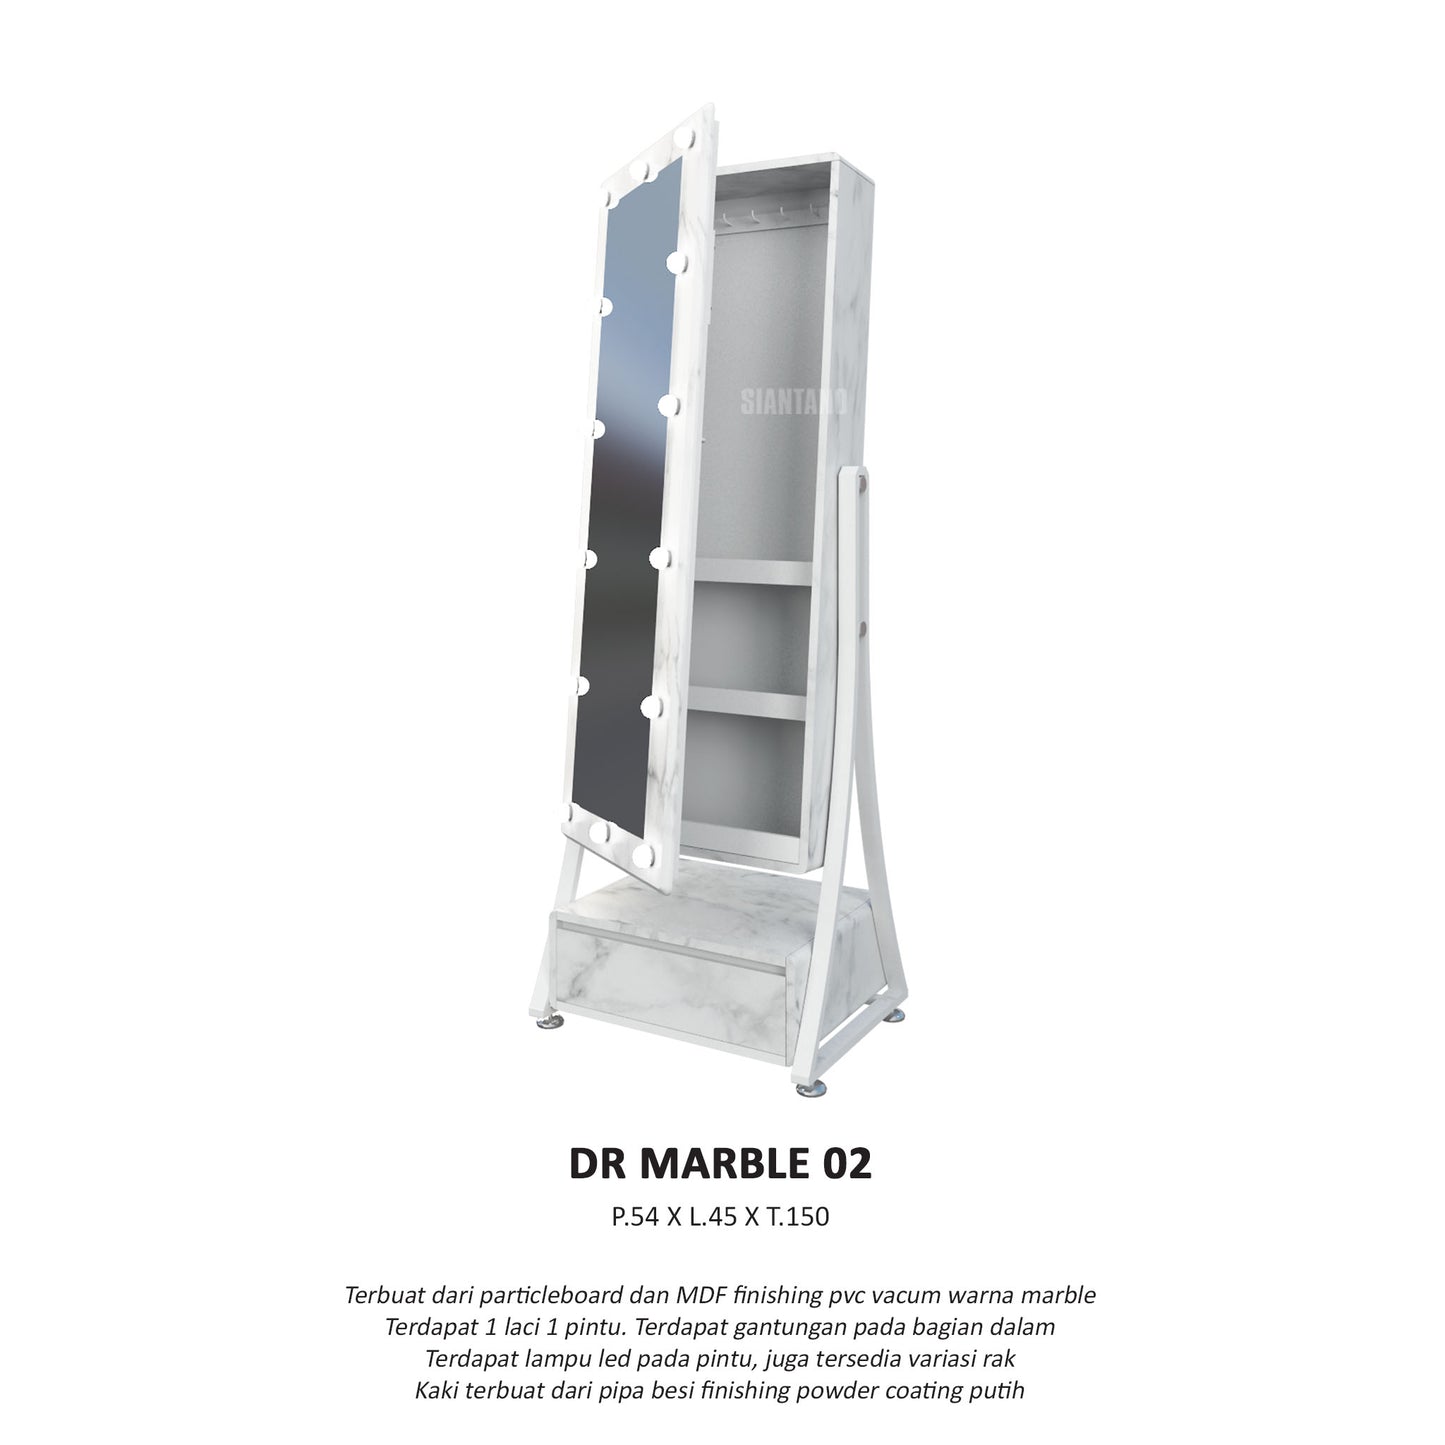 DR MARBLE 02